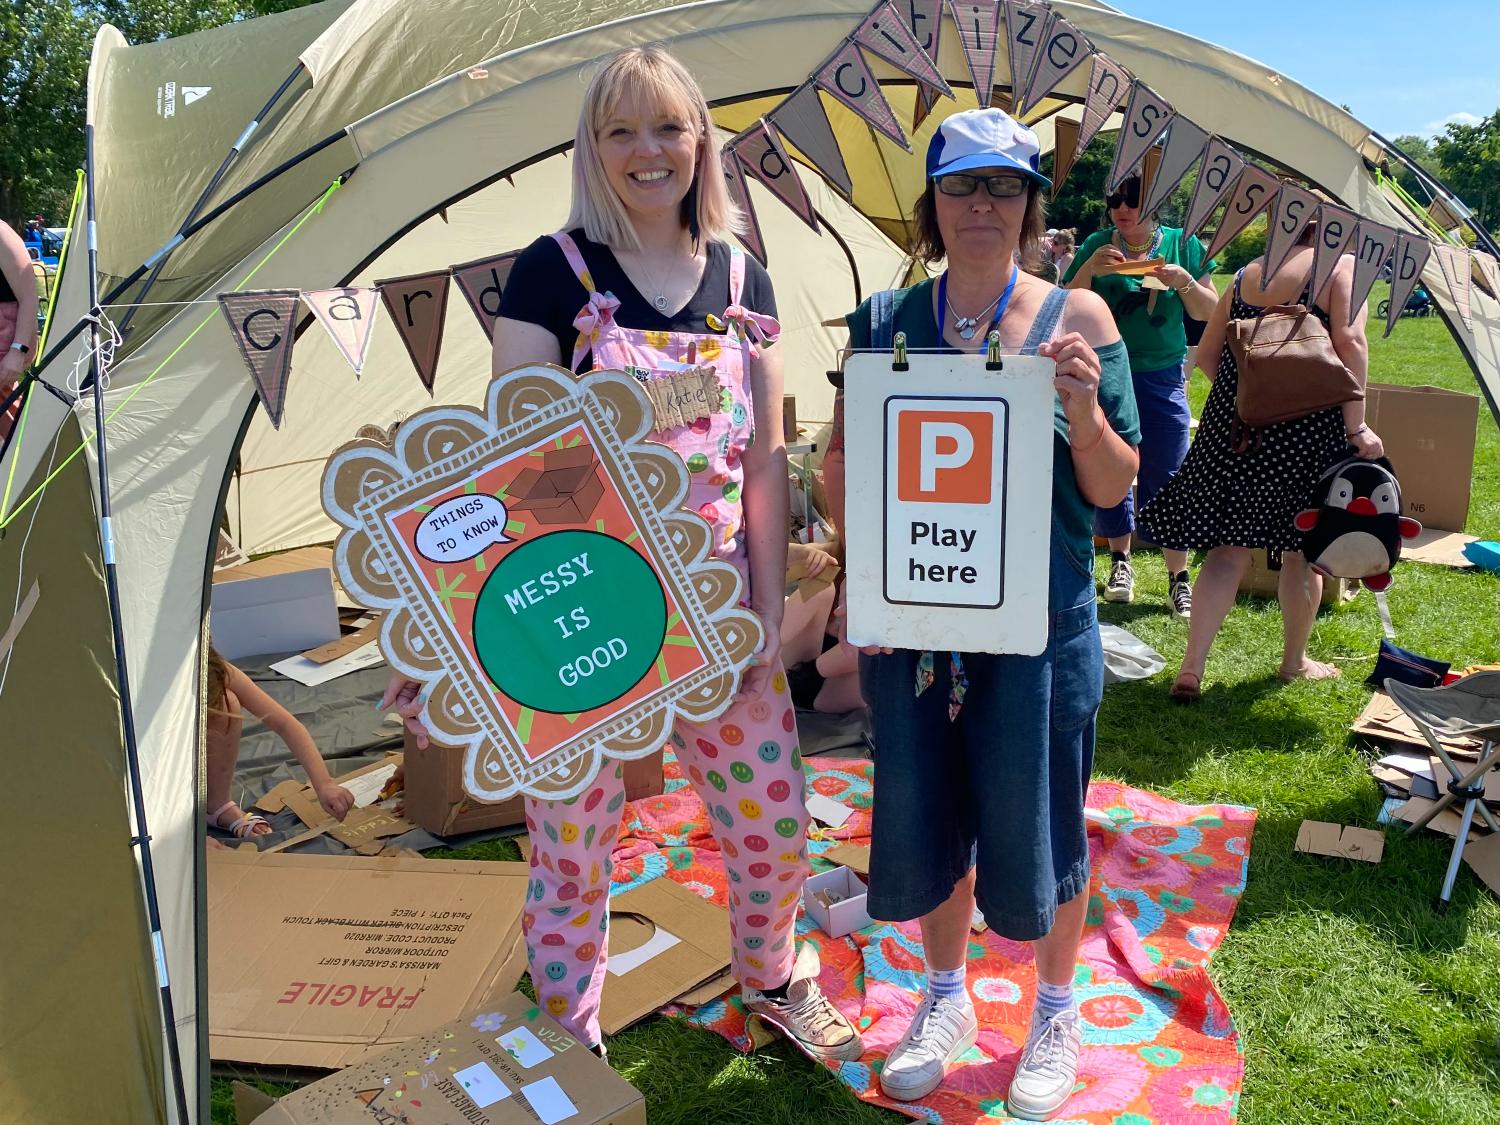 Two women hold up cardboard signs saying 'Messy is good' and 'Play here' with a gazebo full of crafts in the background